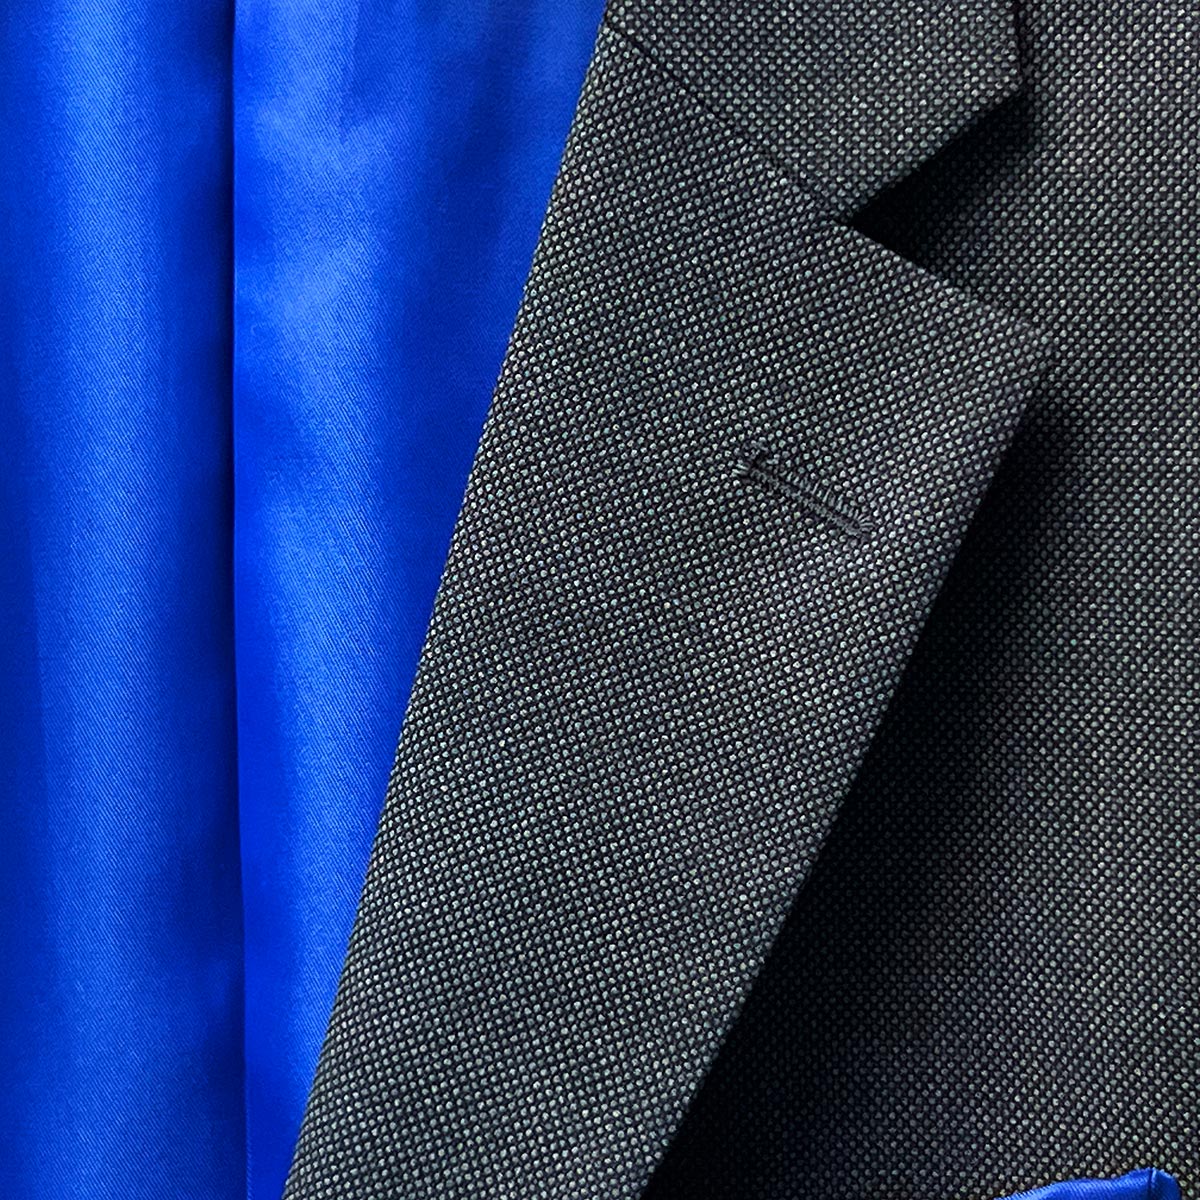 A well-designed lapel buttonhole signifying attention to detail on a dark grey birdseye suit.